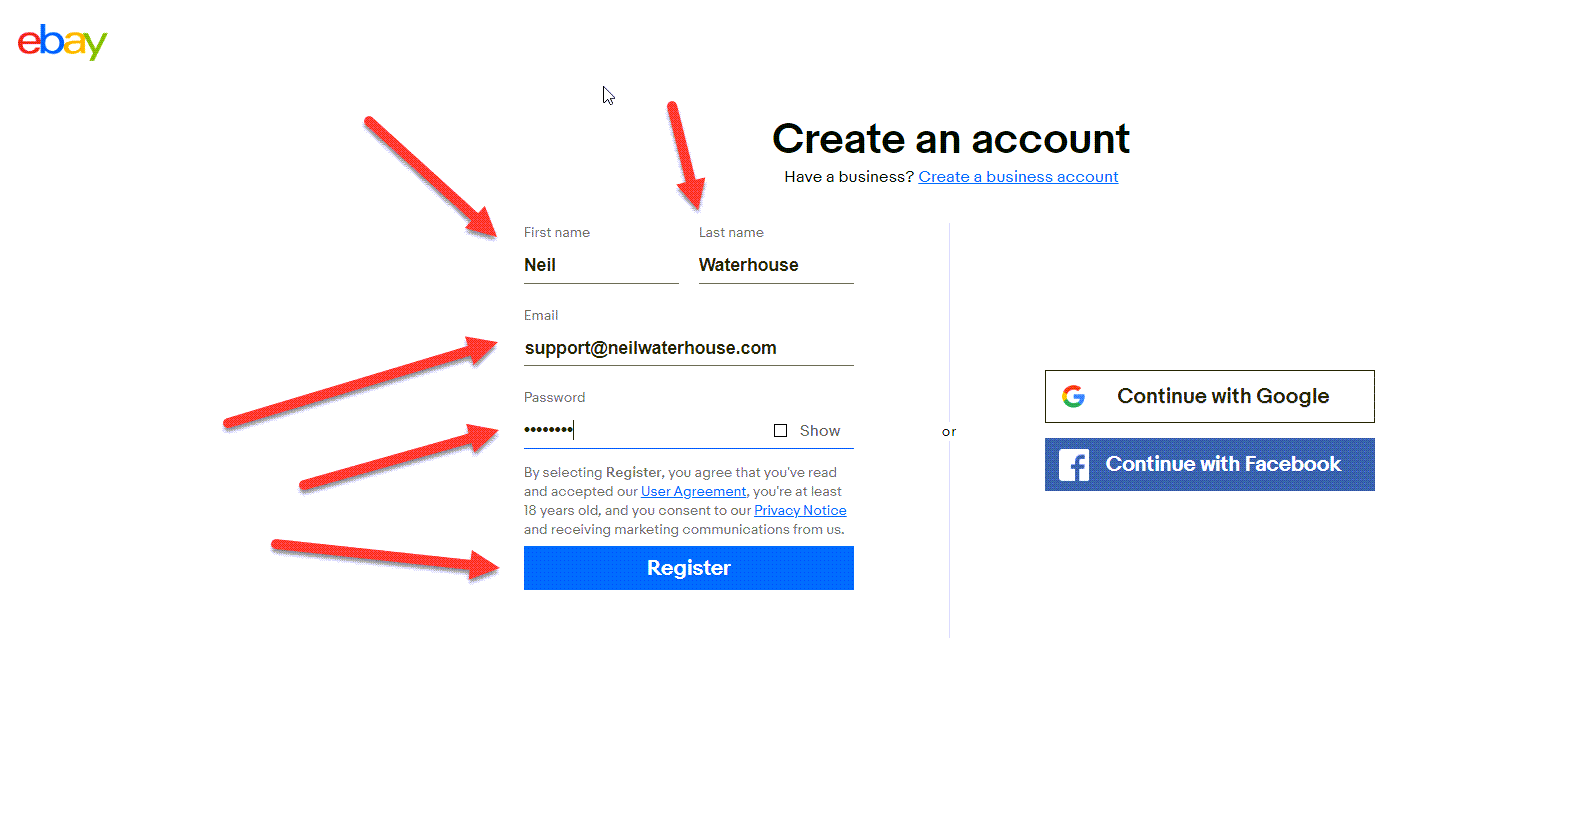 How to open an eBay account